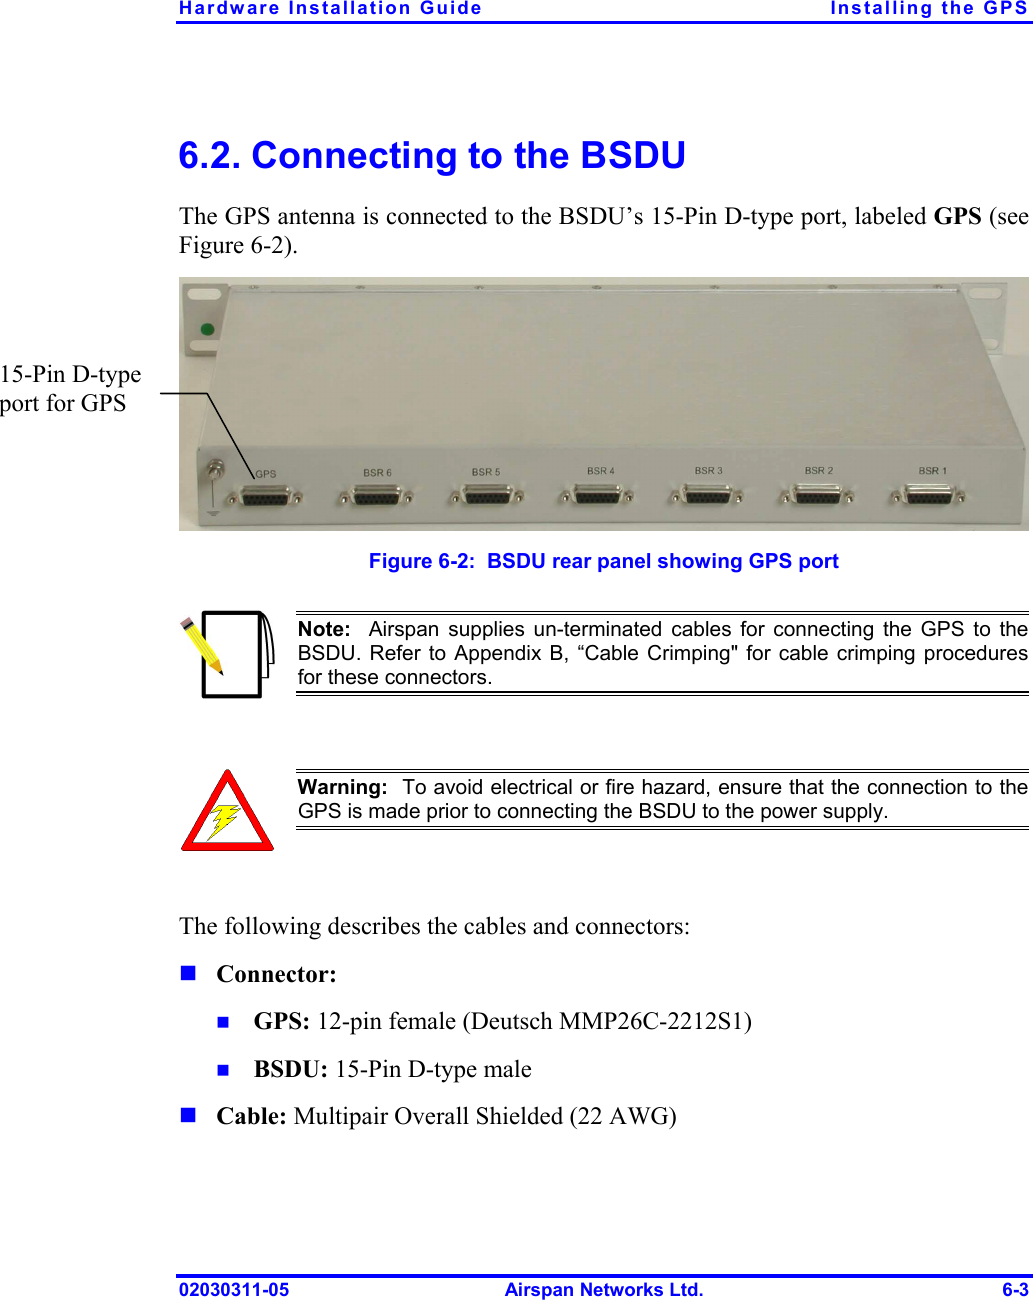 Hardware Installation Guide  Installing the GPS 02030311-05  Airspan Networks Ltd.  6-3 6.2. Connecting to the BSDU The GPS antenna is connected to the BSDU’s 15-Pin D-type port, labeled GPS (see Figure  6-2).   Figure  6-2:  BSDU rear panel showing GPS port  Note:  Airspan supplies un-terminated cables for connecting the GPS to the BSDU. Refer to Appendix B, “Cable Crimping&quot; for cable crimping proceduresfor these connectors.   Warning:  To avoid electrical or fire hazard, ensure that the connection to theGPS is made prior to connecting the BSDU to the power supply.  The following describes the cables and connectors: ! Connector:  !  GPS: 12-pin female (Deutsch MMP26C-2212S1) !  BSDU: 15-Pin D-type male ! Cable: Multipair Overall Shielded (22 AWG) 15-Pin D-type port for GPS  